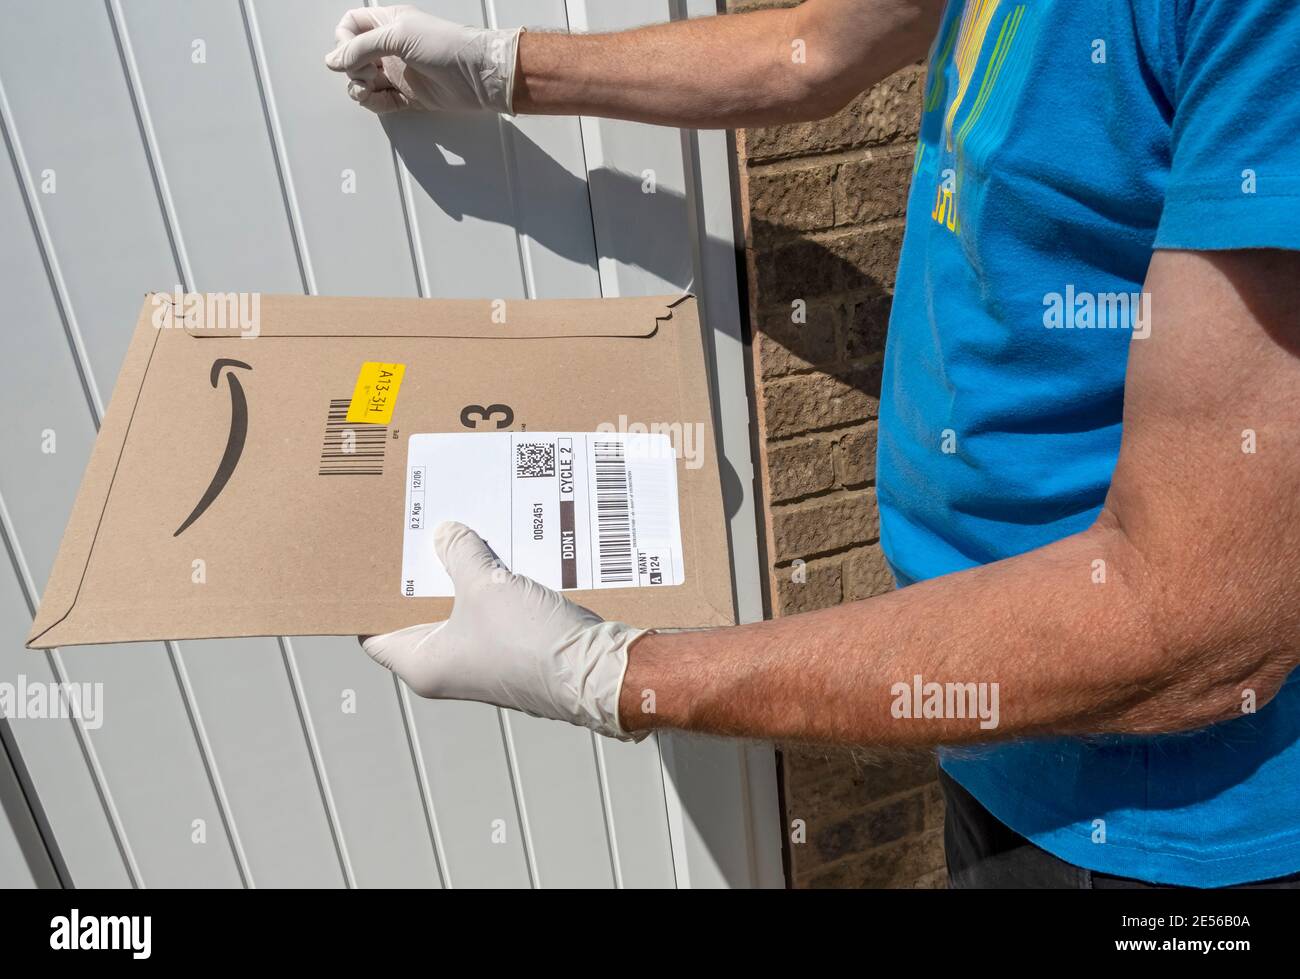 Delivery man knocking on a house door to deliver an Amazon parcel. Stock Photo